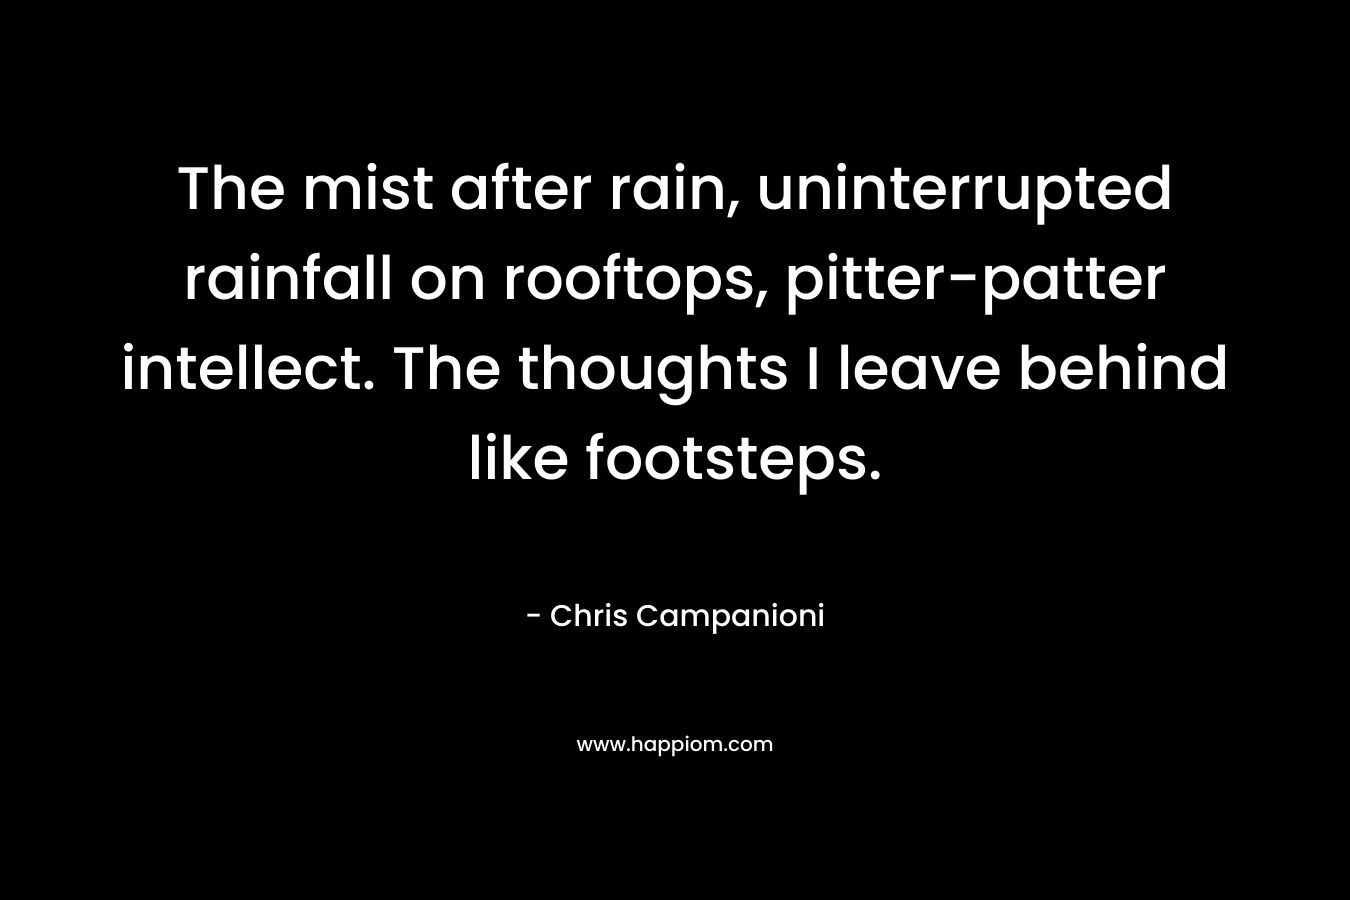 The mist after rain, uninterrupted rainfall on rooftops, pitter-patter intellect. The thoughts I leave behind like footsteps. – Chris Campanioni